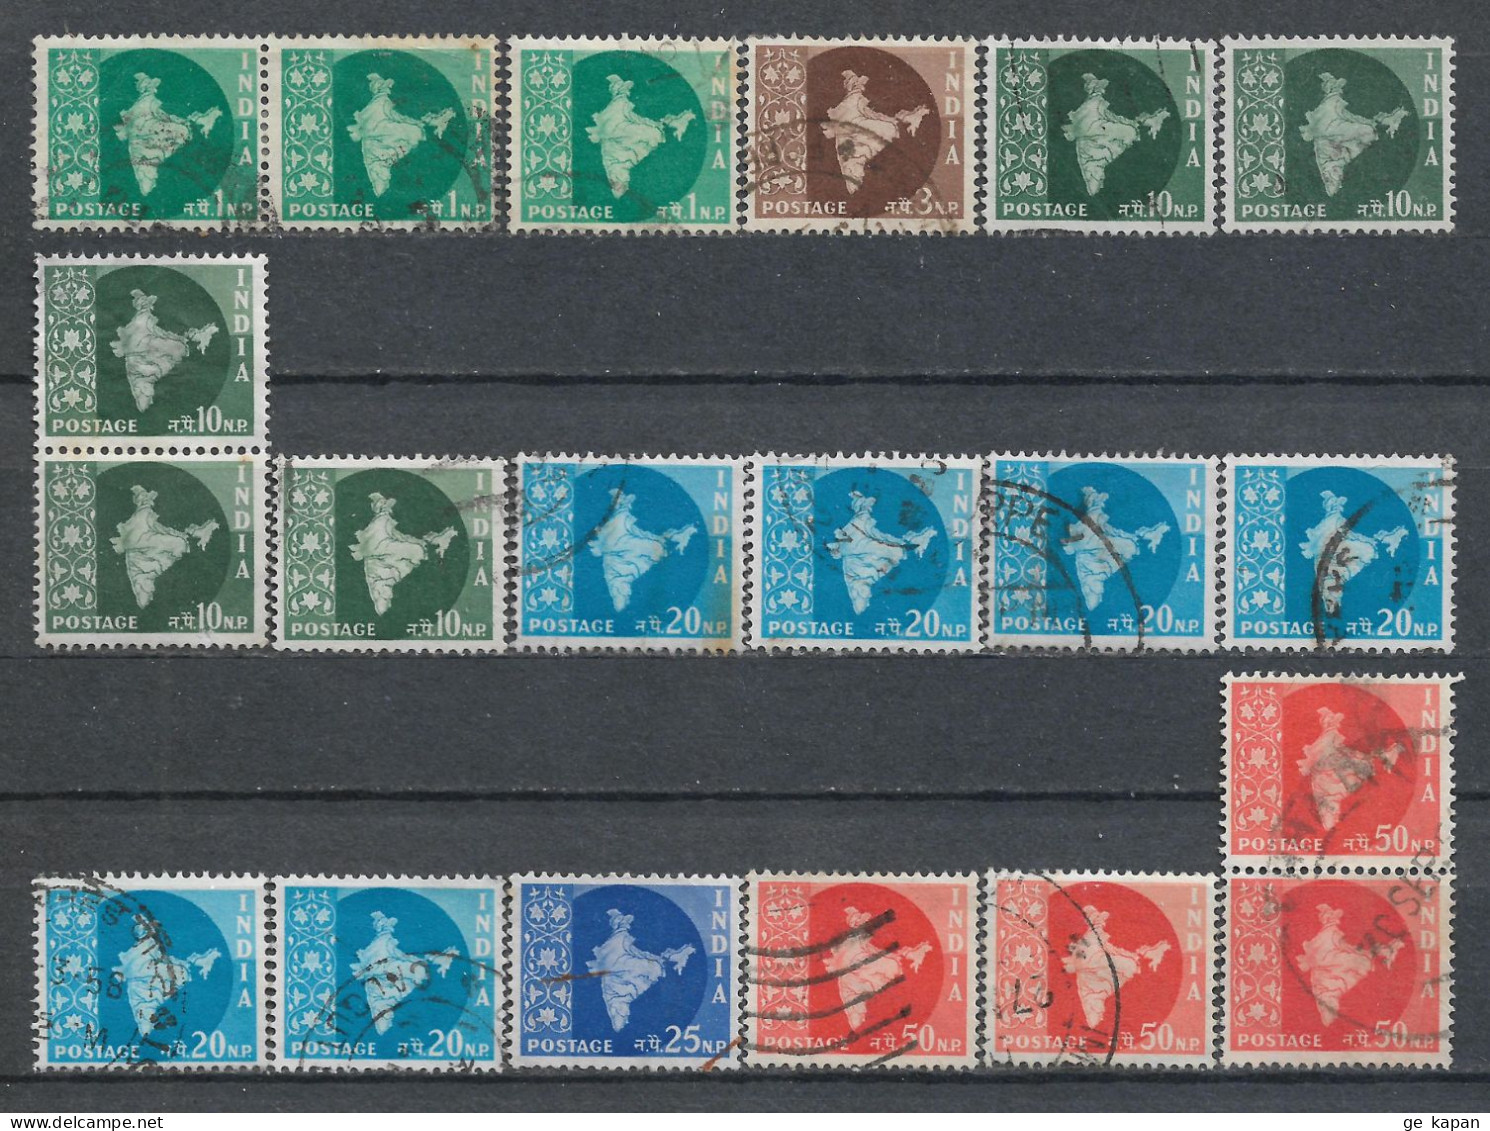 1957 INDIA SET OF 20 USED STAMPS (Michel # 259,261,265,268-270) CV €4.00 - Gebraucht